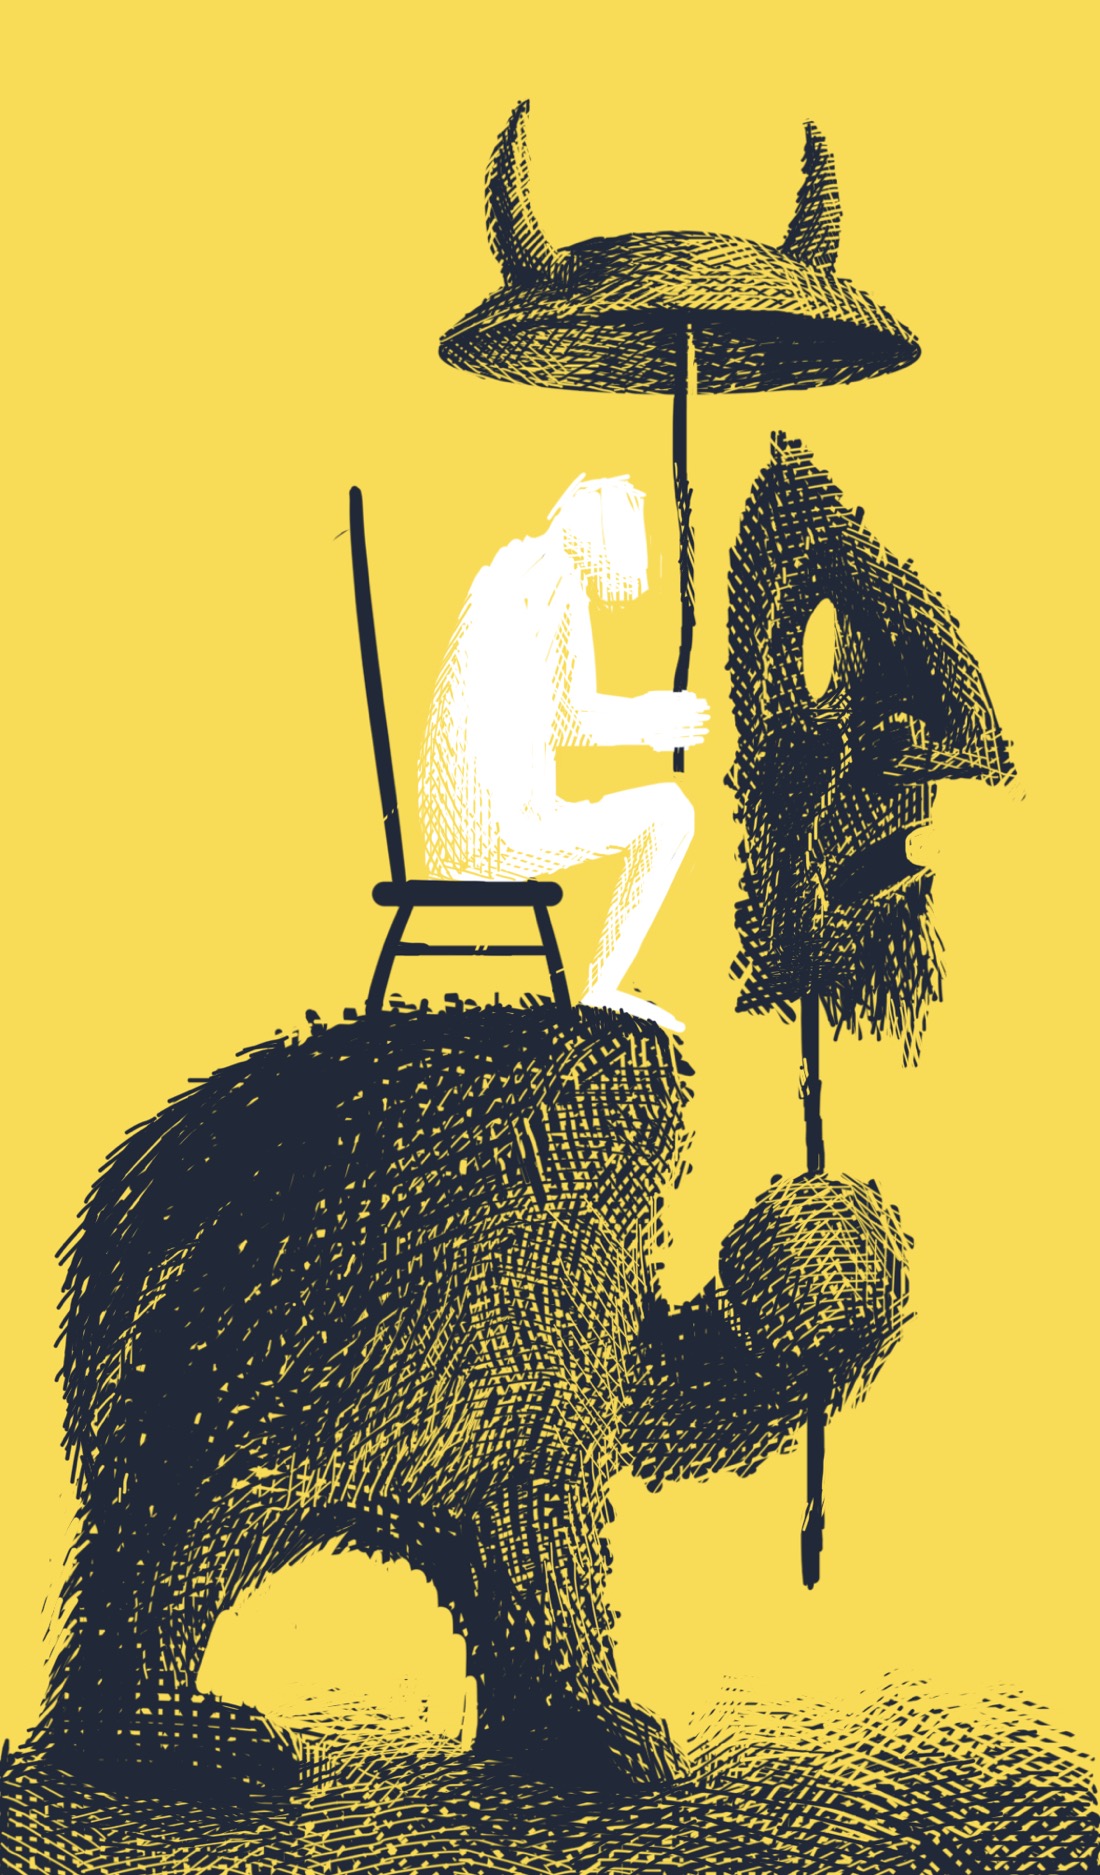 A large, furry, headless figure holds up a large mask on a stick. The mask is a big-nosed, bearded face with its mouth slightly open. Sitting on top of the figure, where its head would normally be, is a person sitting in a chair. The mask is positioned directly in front of the seated person, obscuring it totally from view if you were approaching the headless figure, er, head-on. The seated person is holding an umbrella with two horns on top. The overall effect is of a large, horned, furry monster, with most of its head replaced by a person sitting in a chair.